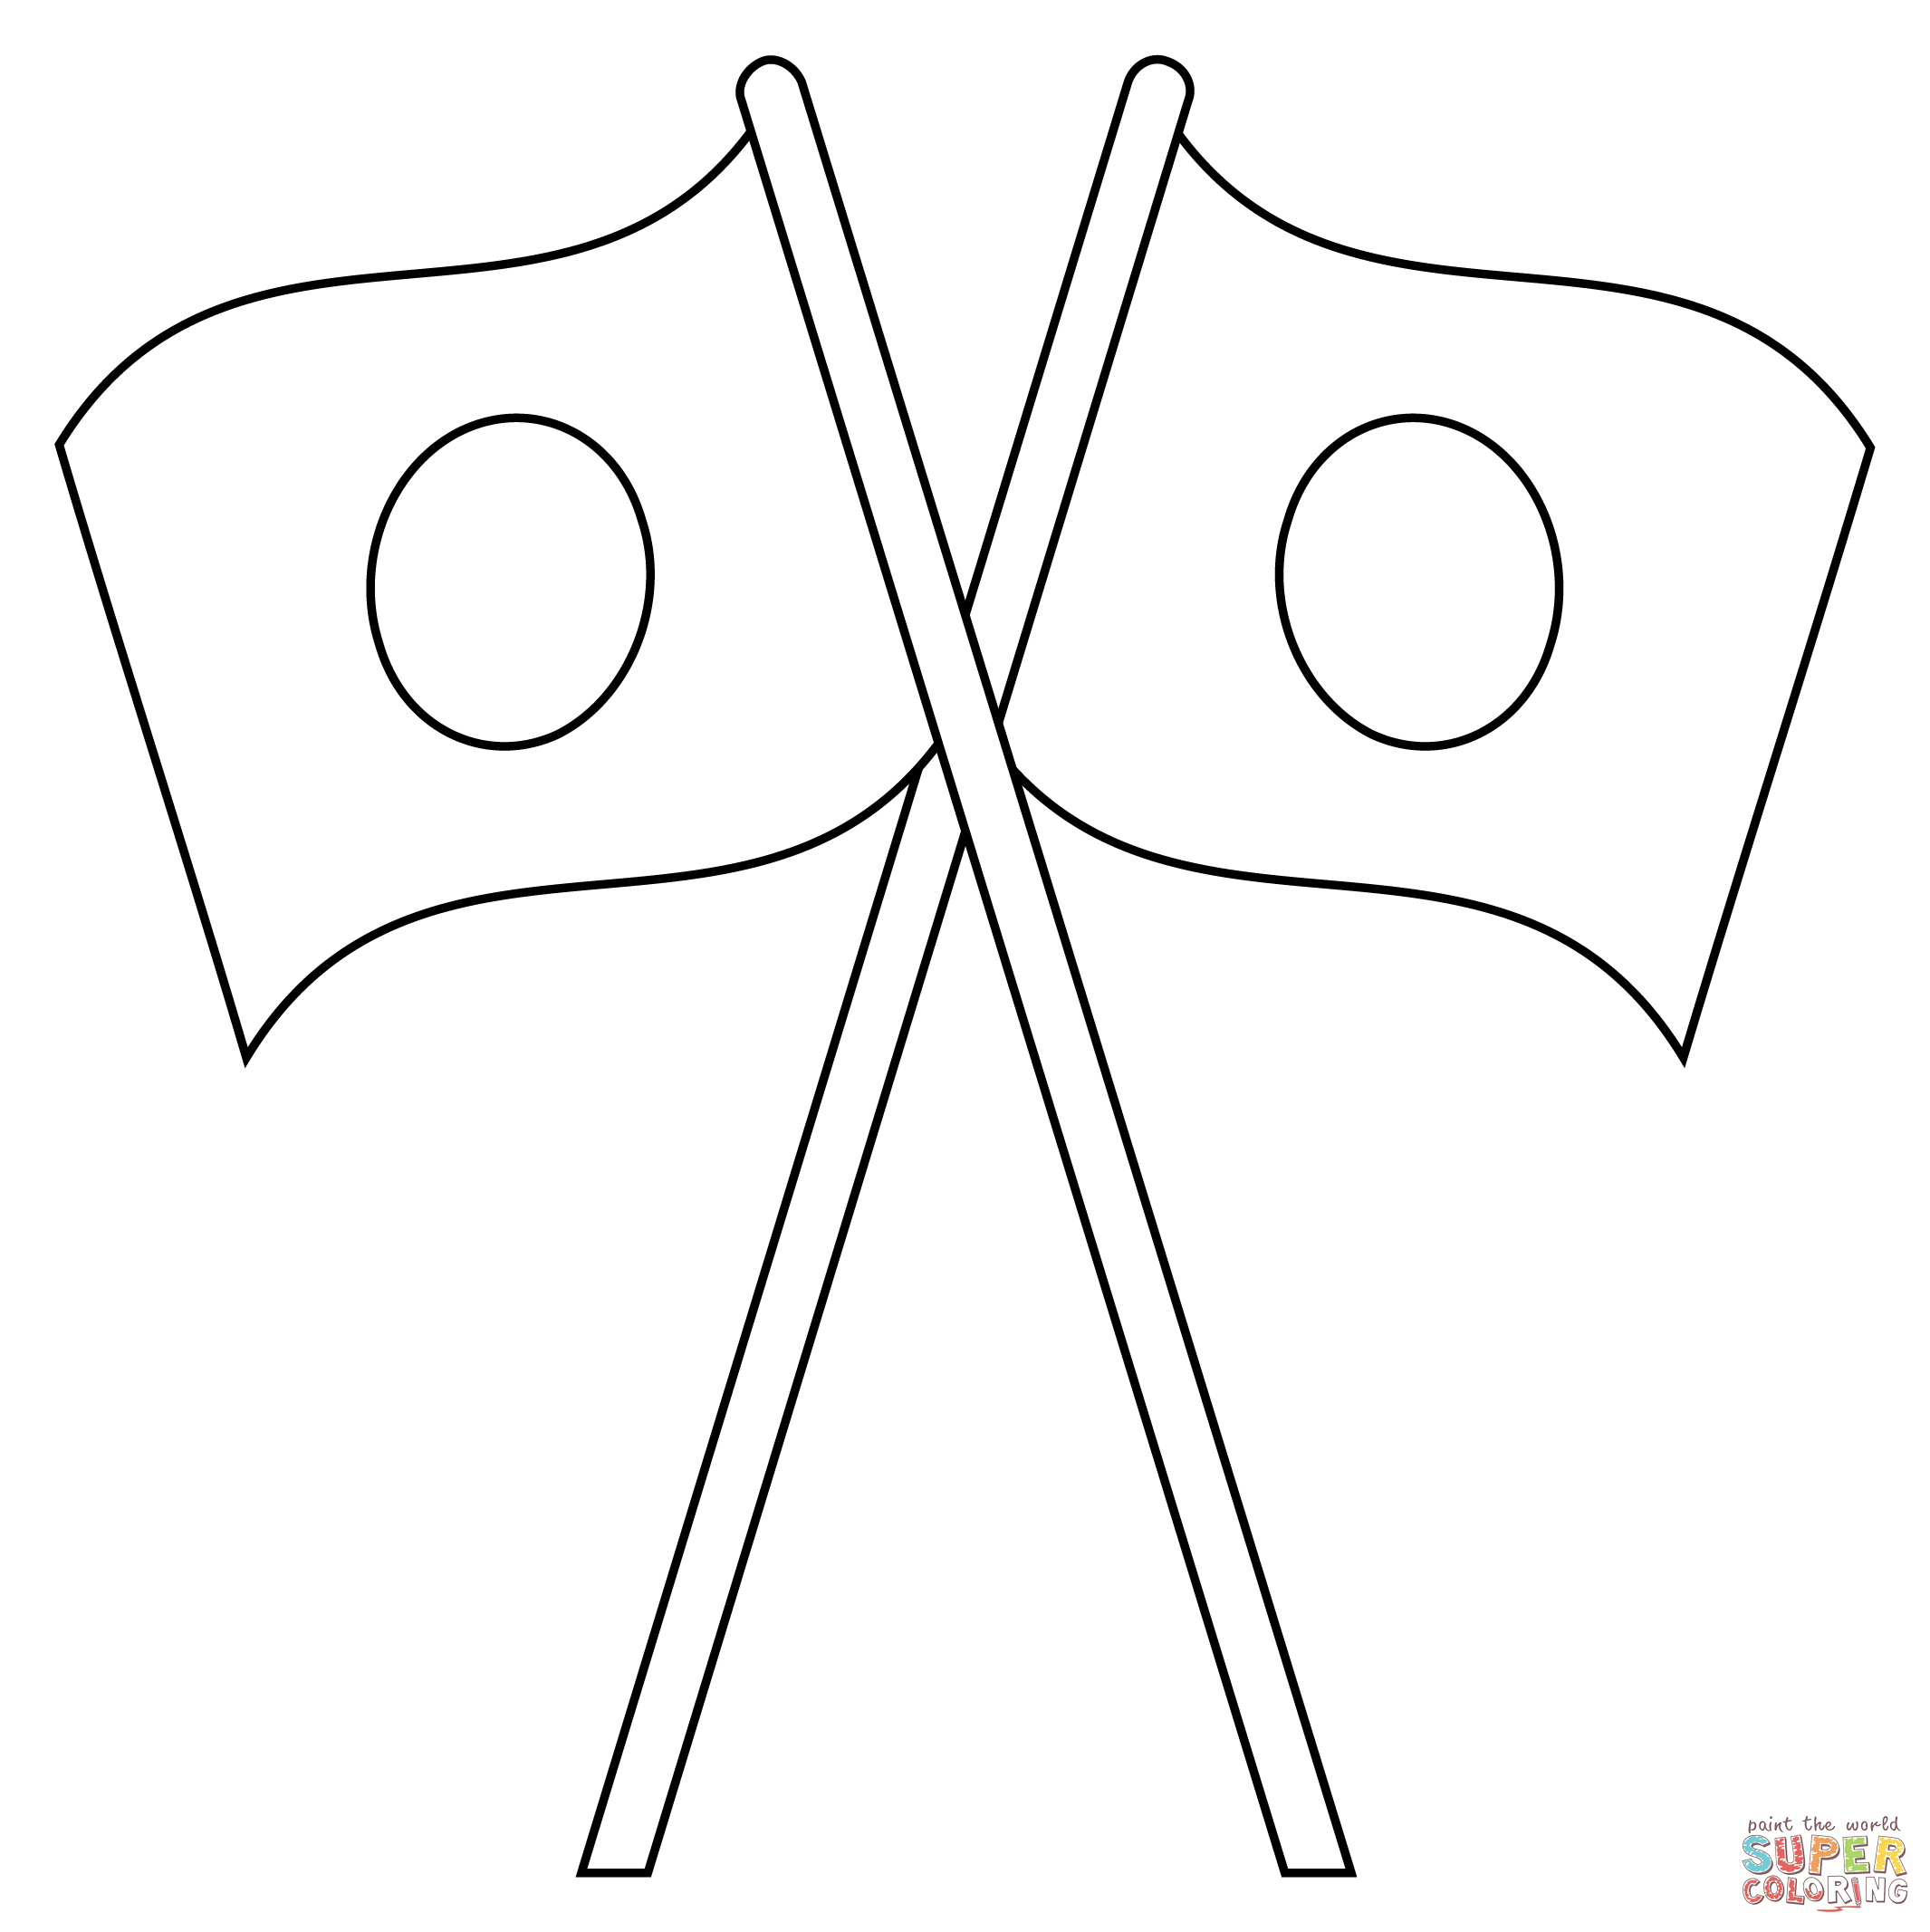 Crossed flags coloring page free printable coloring pages